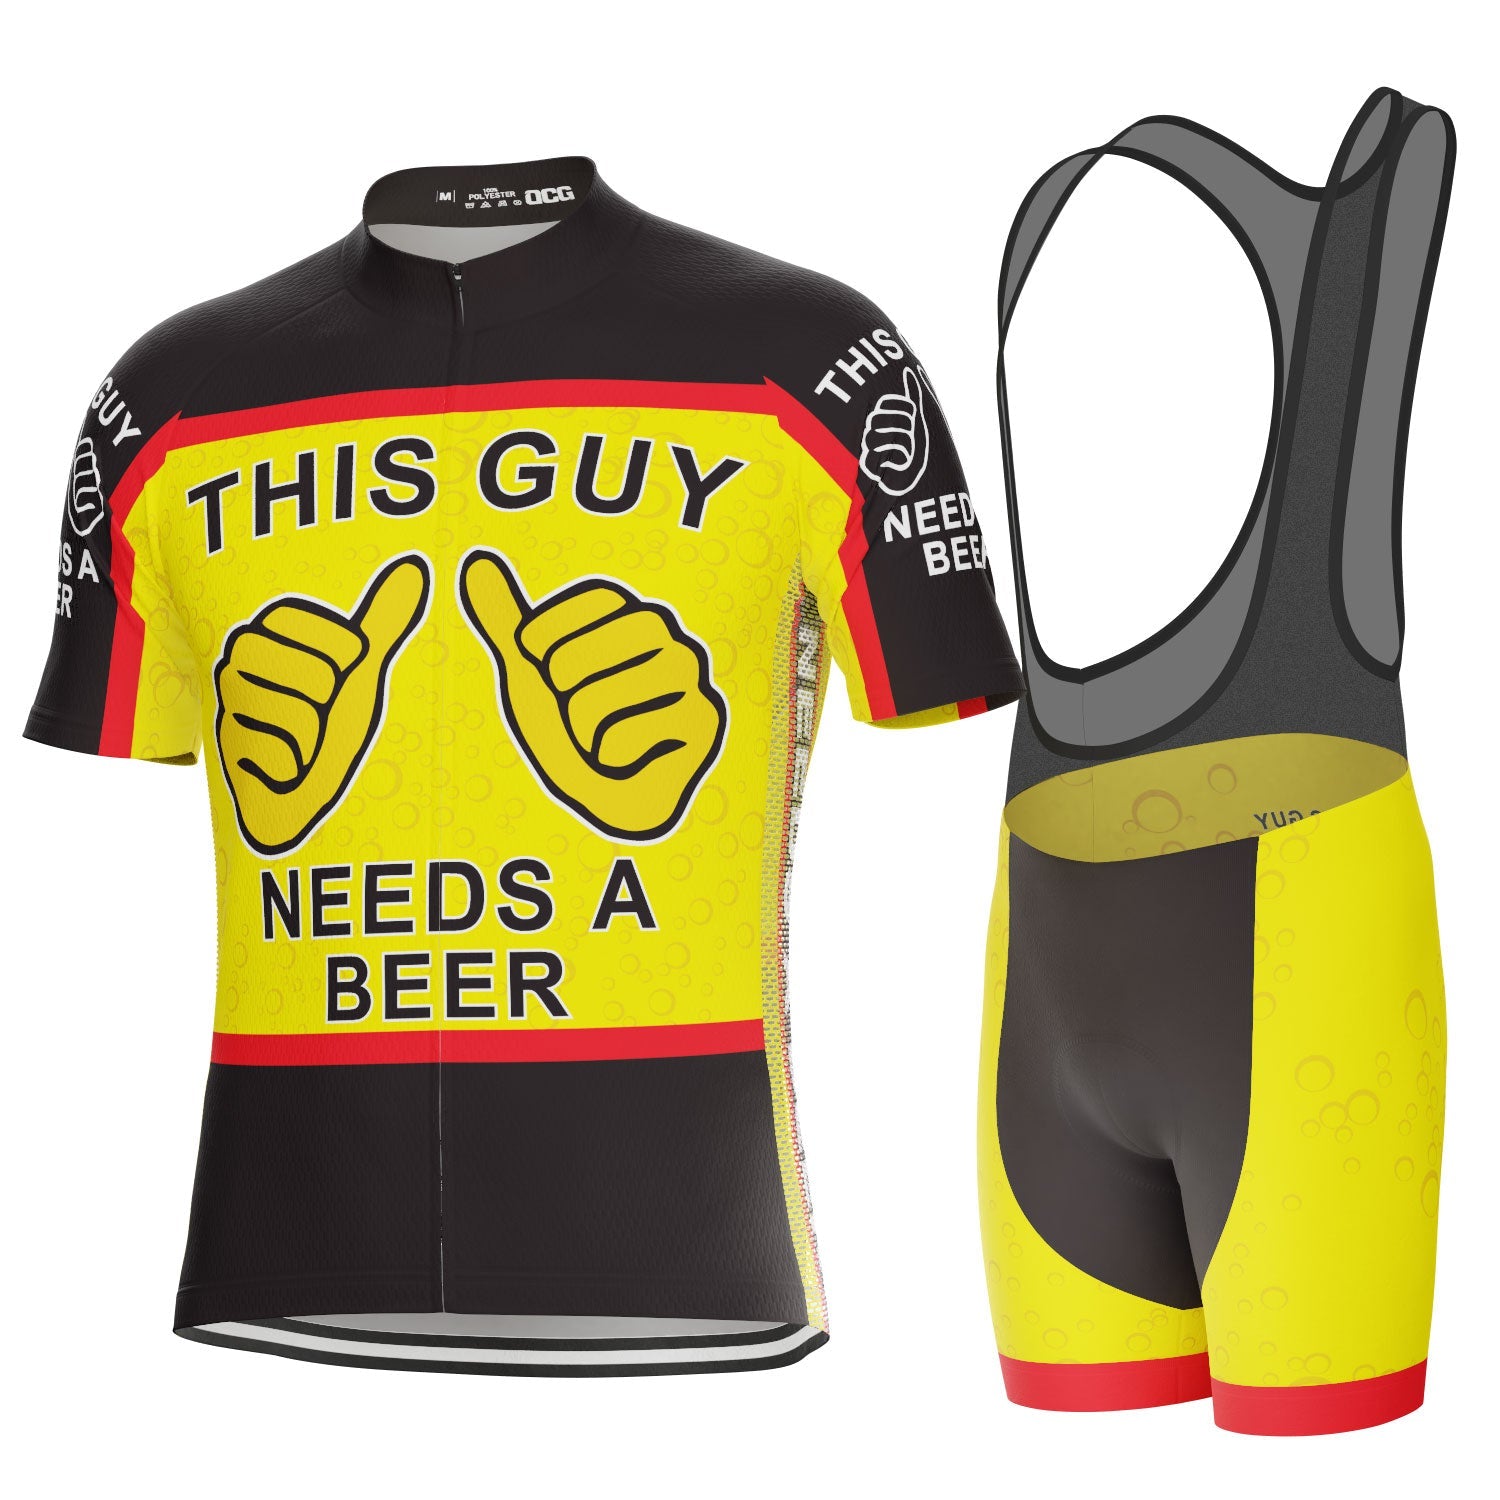 Needs a Beer Quick-Dry Cycling Cap + Men's This Guy Needs a Beer Short Sleeve Cycling Kit + OCG Men's Soft Mesh Gel Padded Cycling Underwear Undershorts